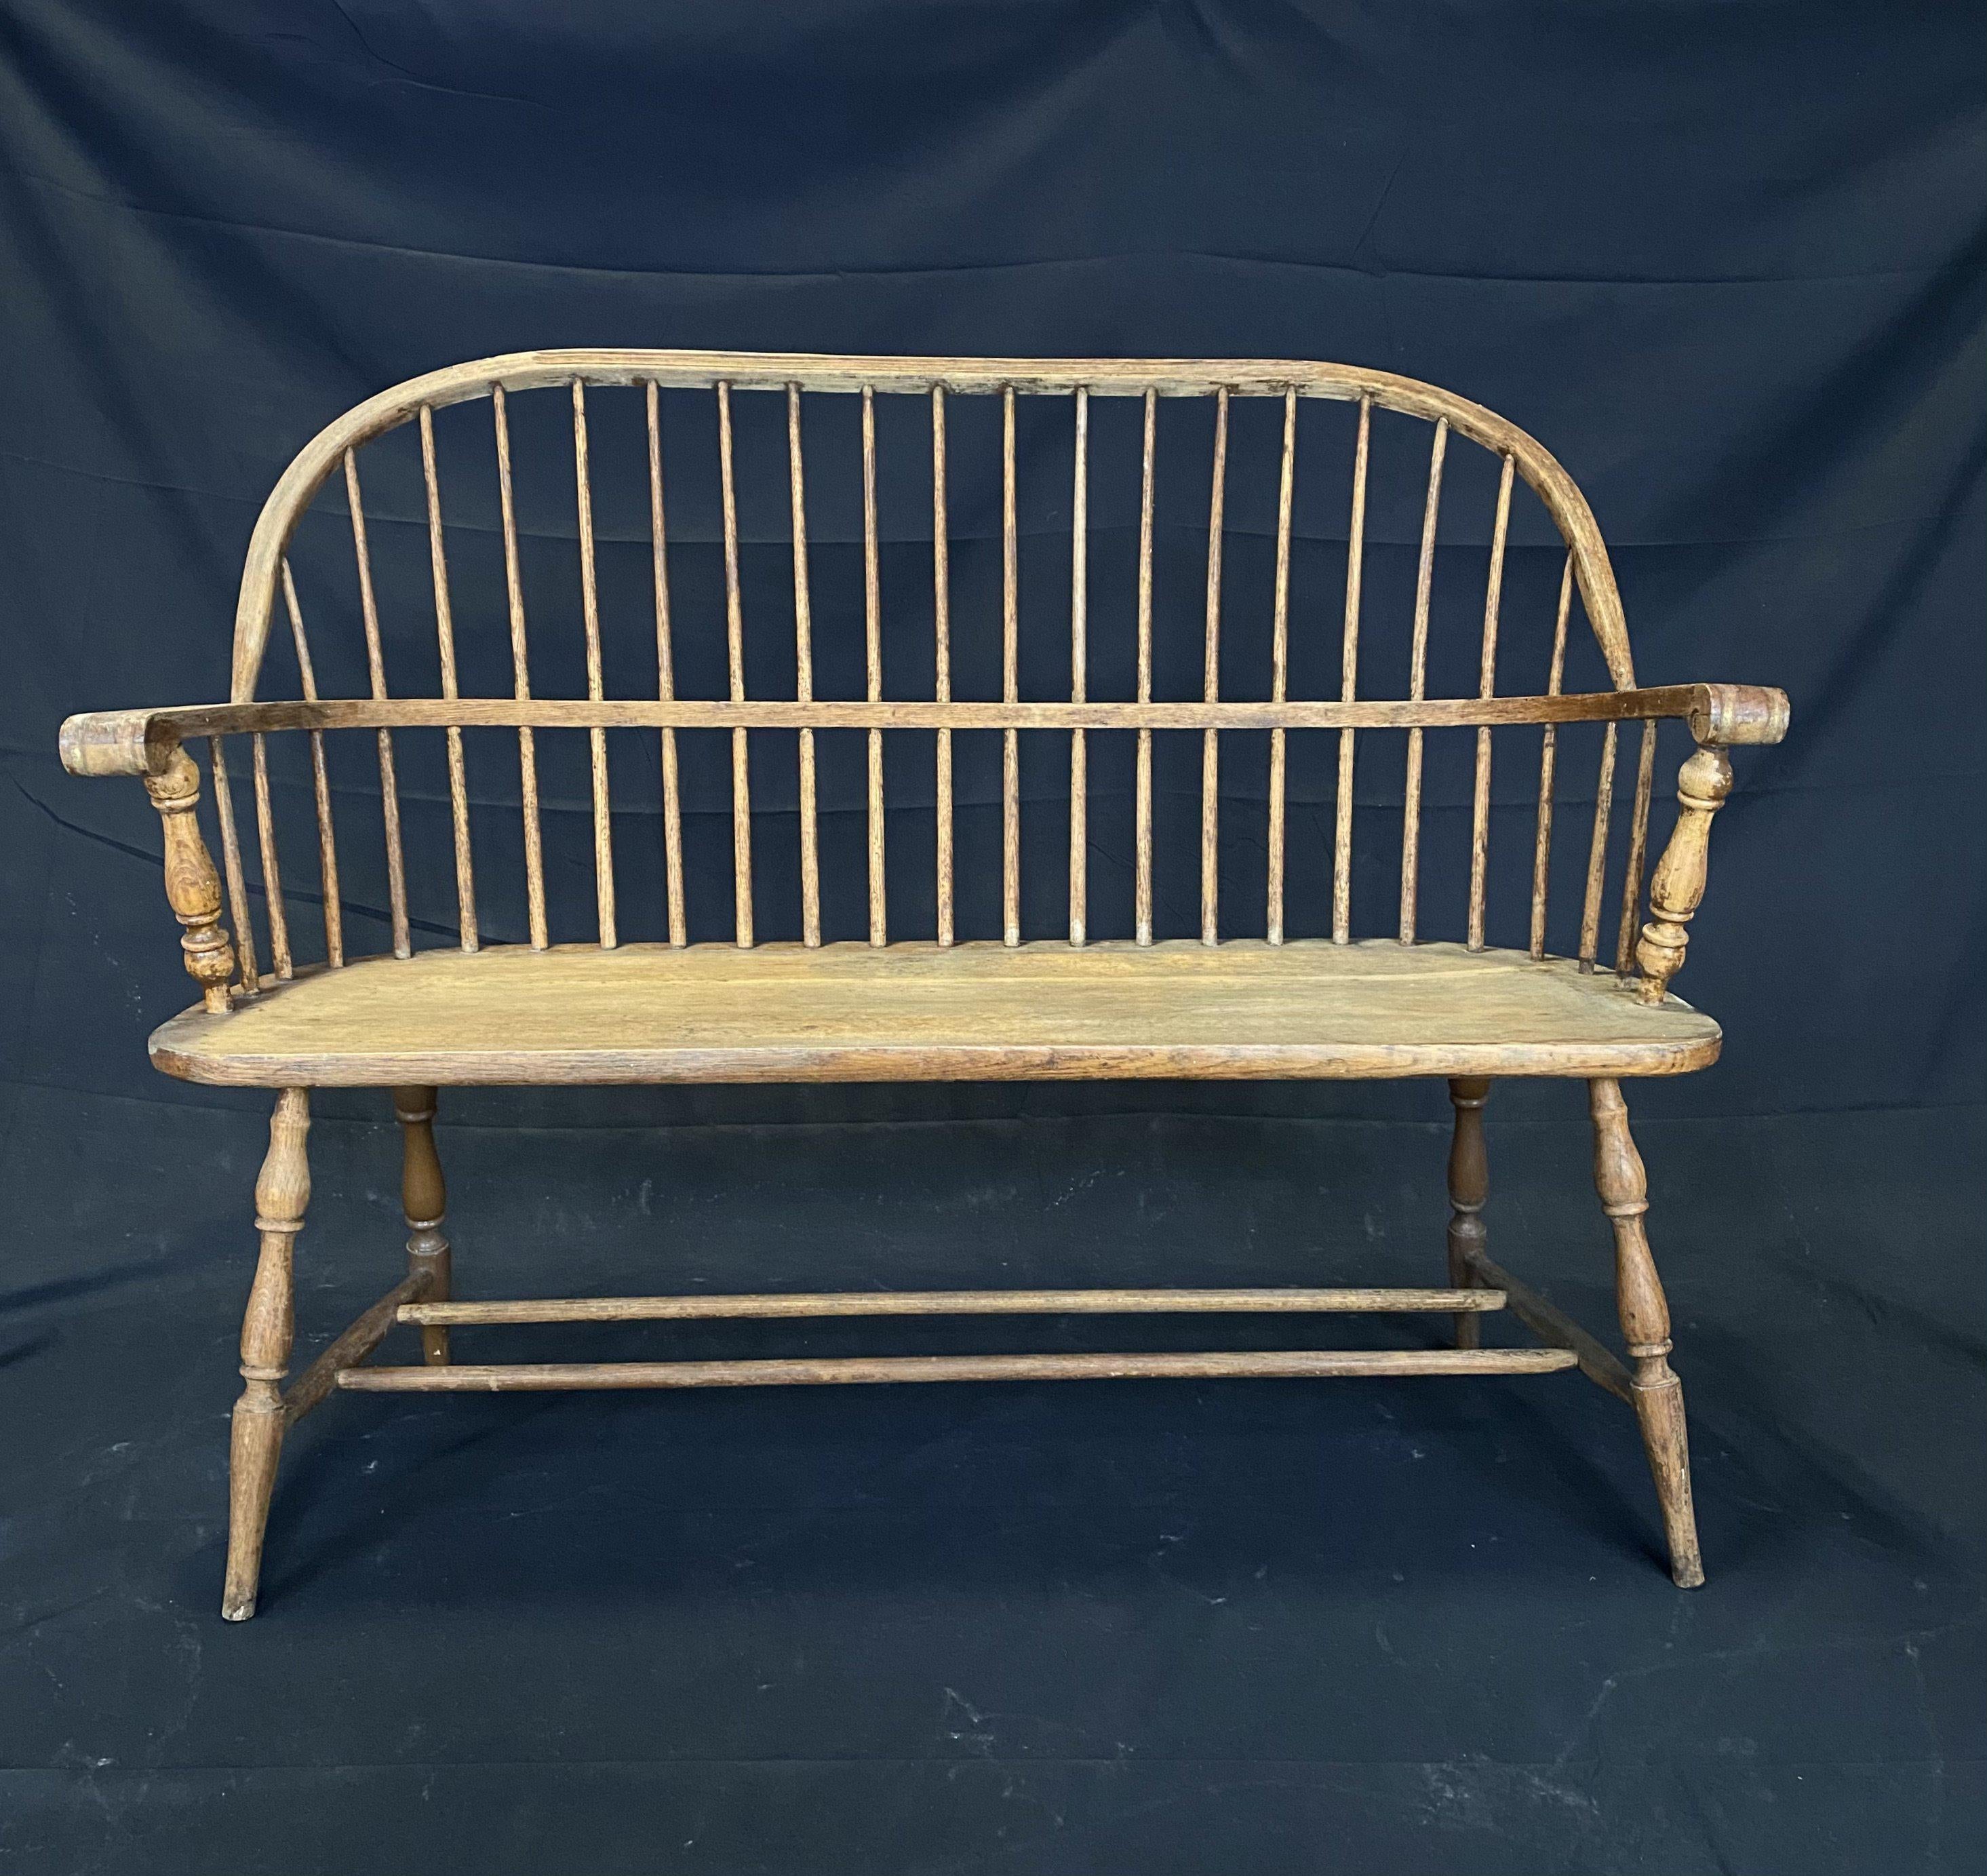 An original Windsor 19th century painted hoop spindle back oak bench with an arched back having turned slats, arms and uprights, the shaped plank seat above turned splayed legs. Remnants of early brown paint are visible. Bought in Maine. Solid and